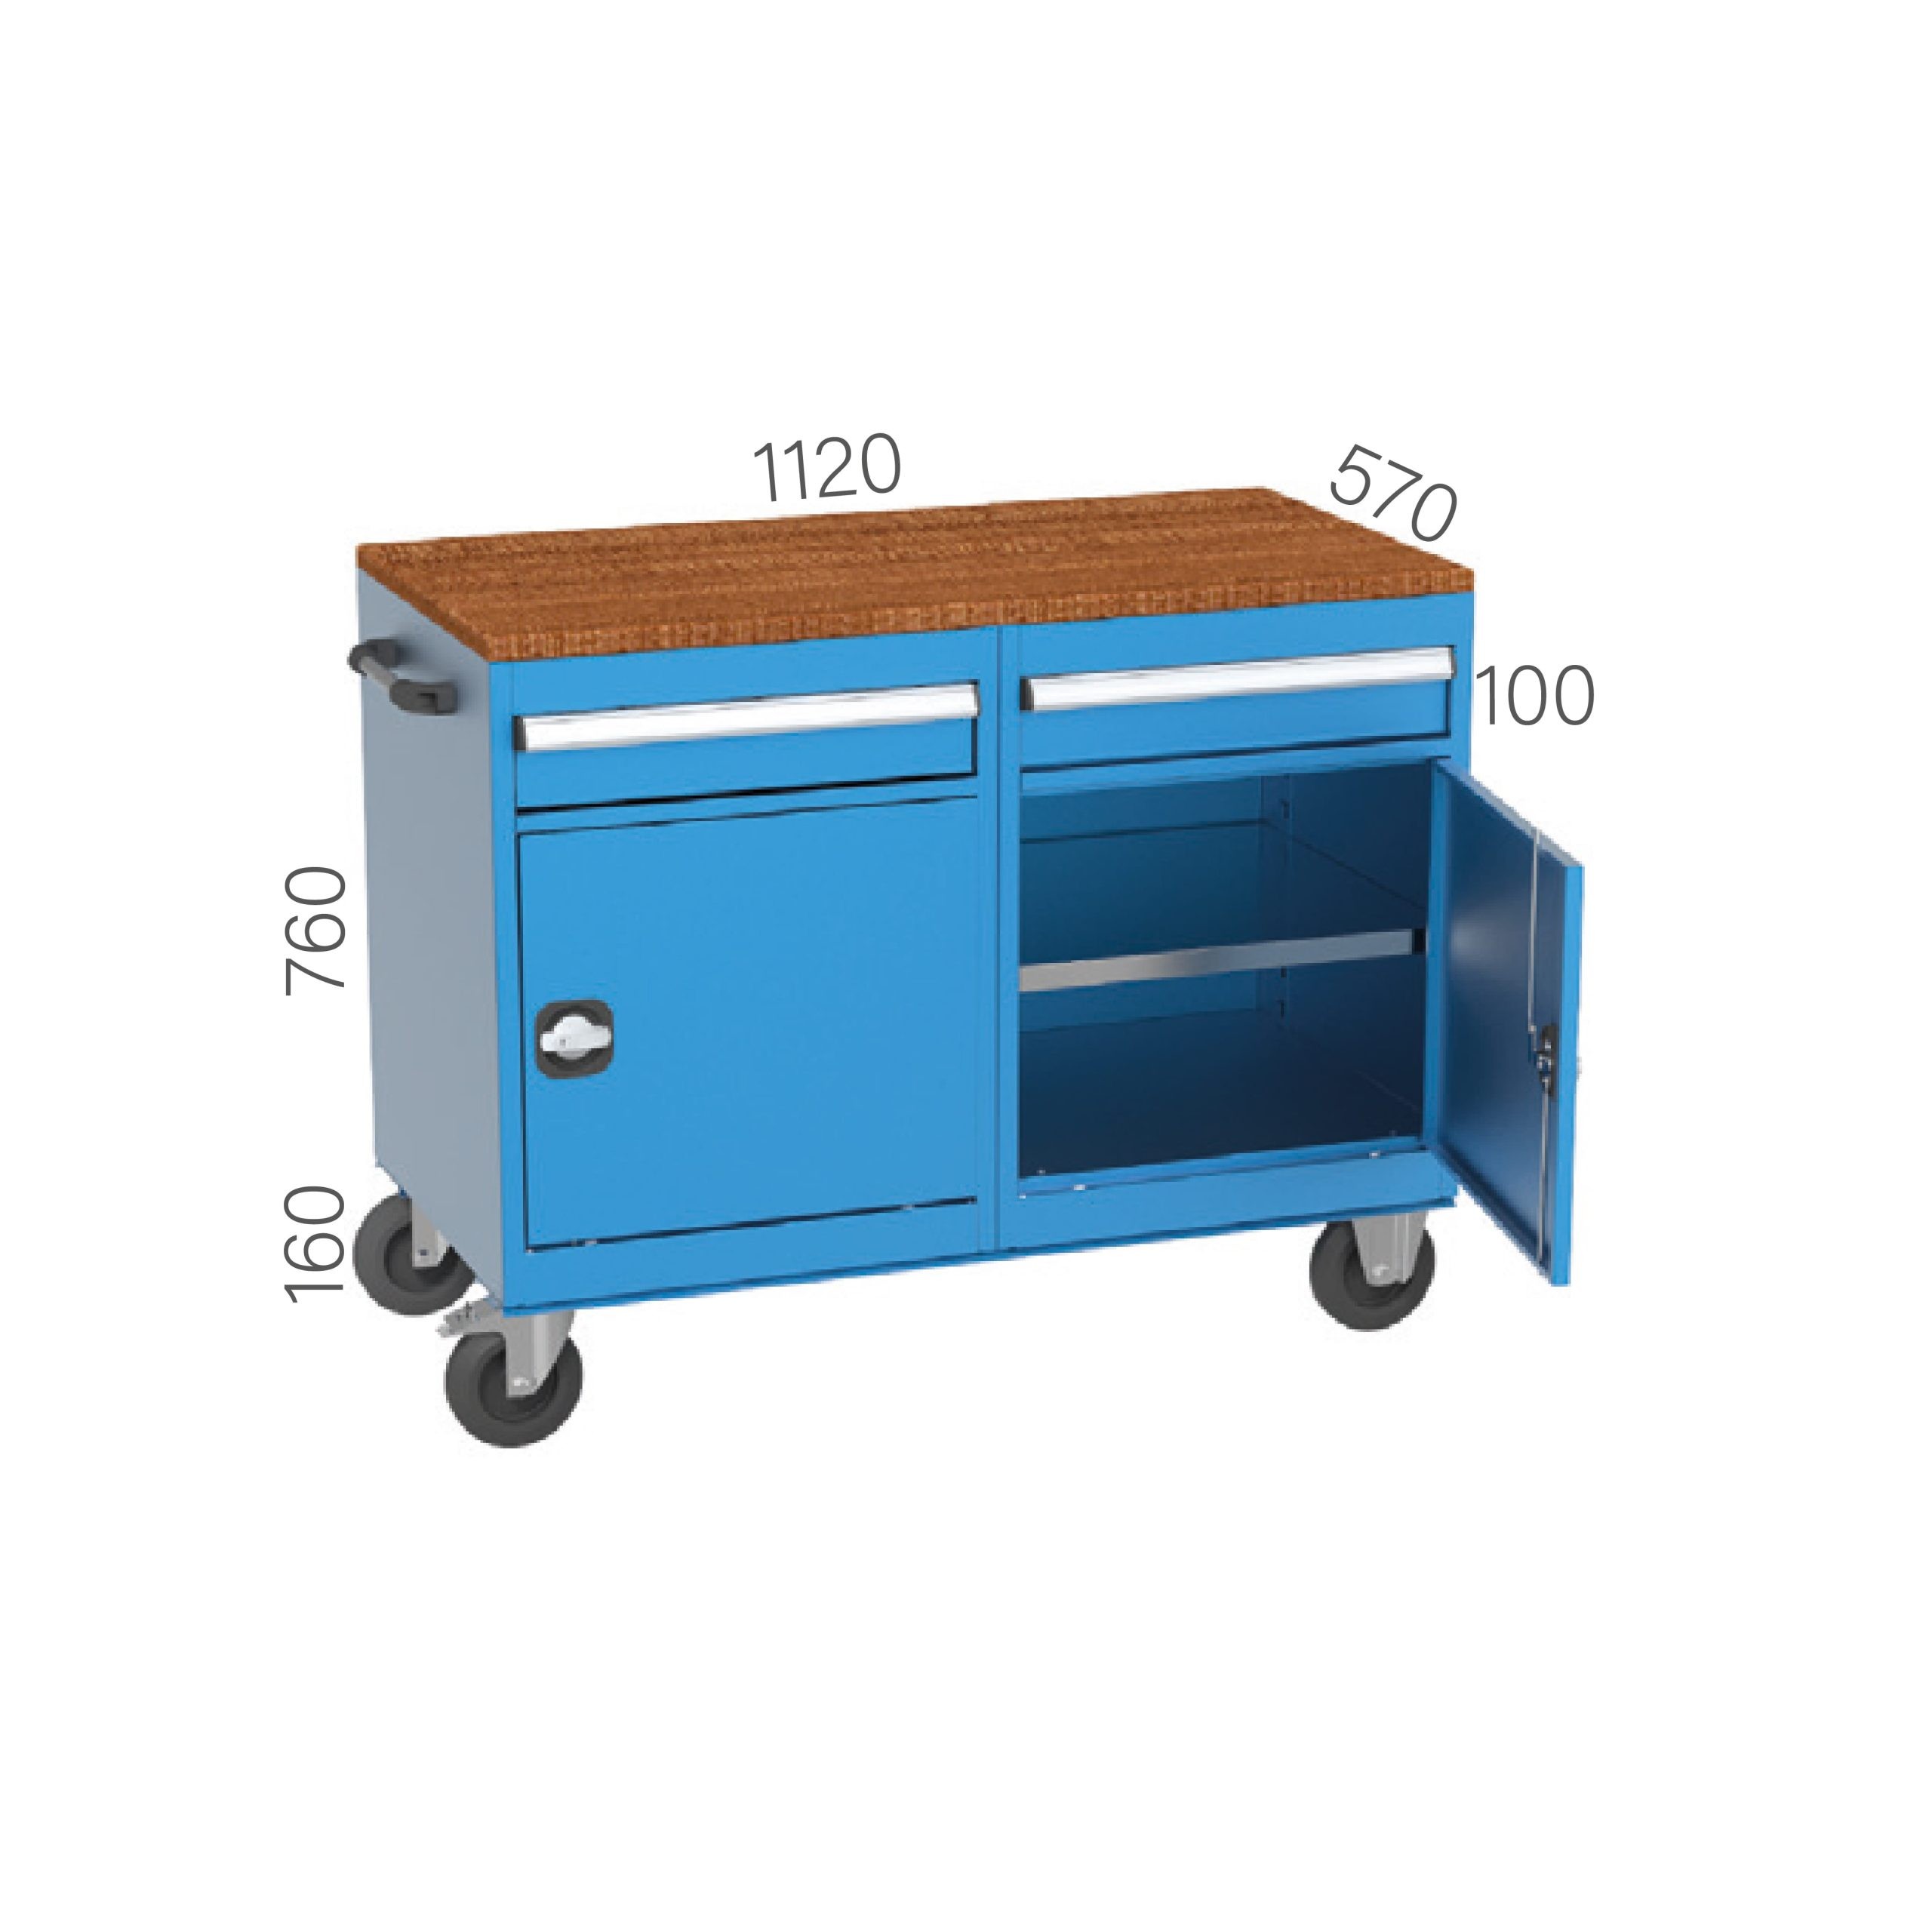 8052 – WORKING CART 2 DRAWERS, 2 CABINETS, PEGBOARD and WHEELS